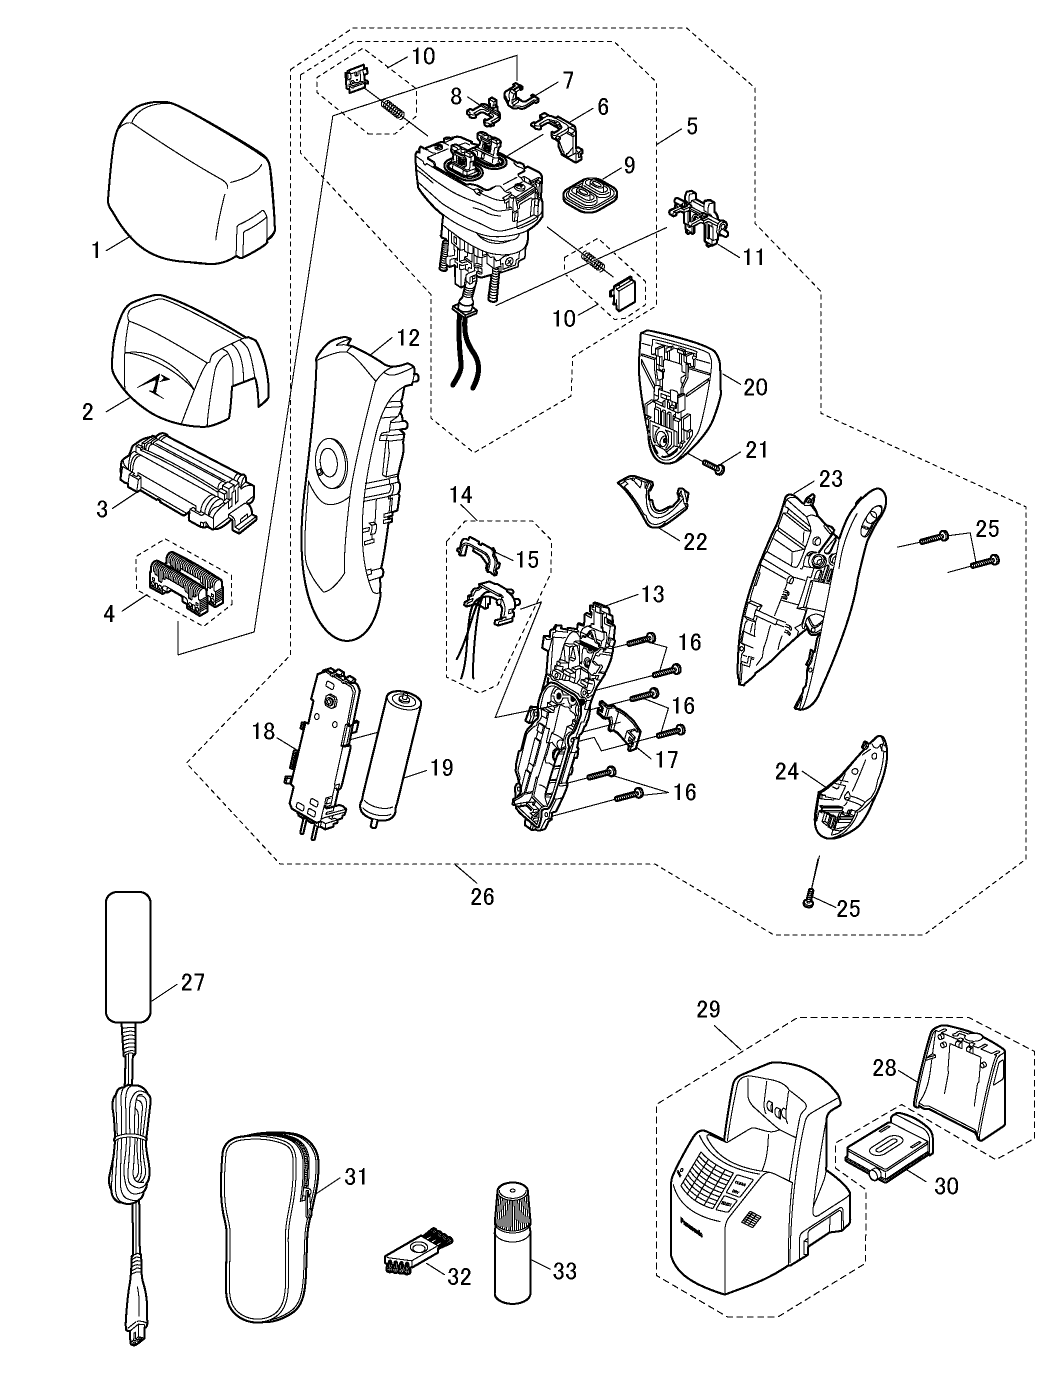 ES-LF71: Exploded View